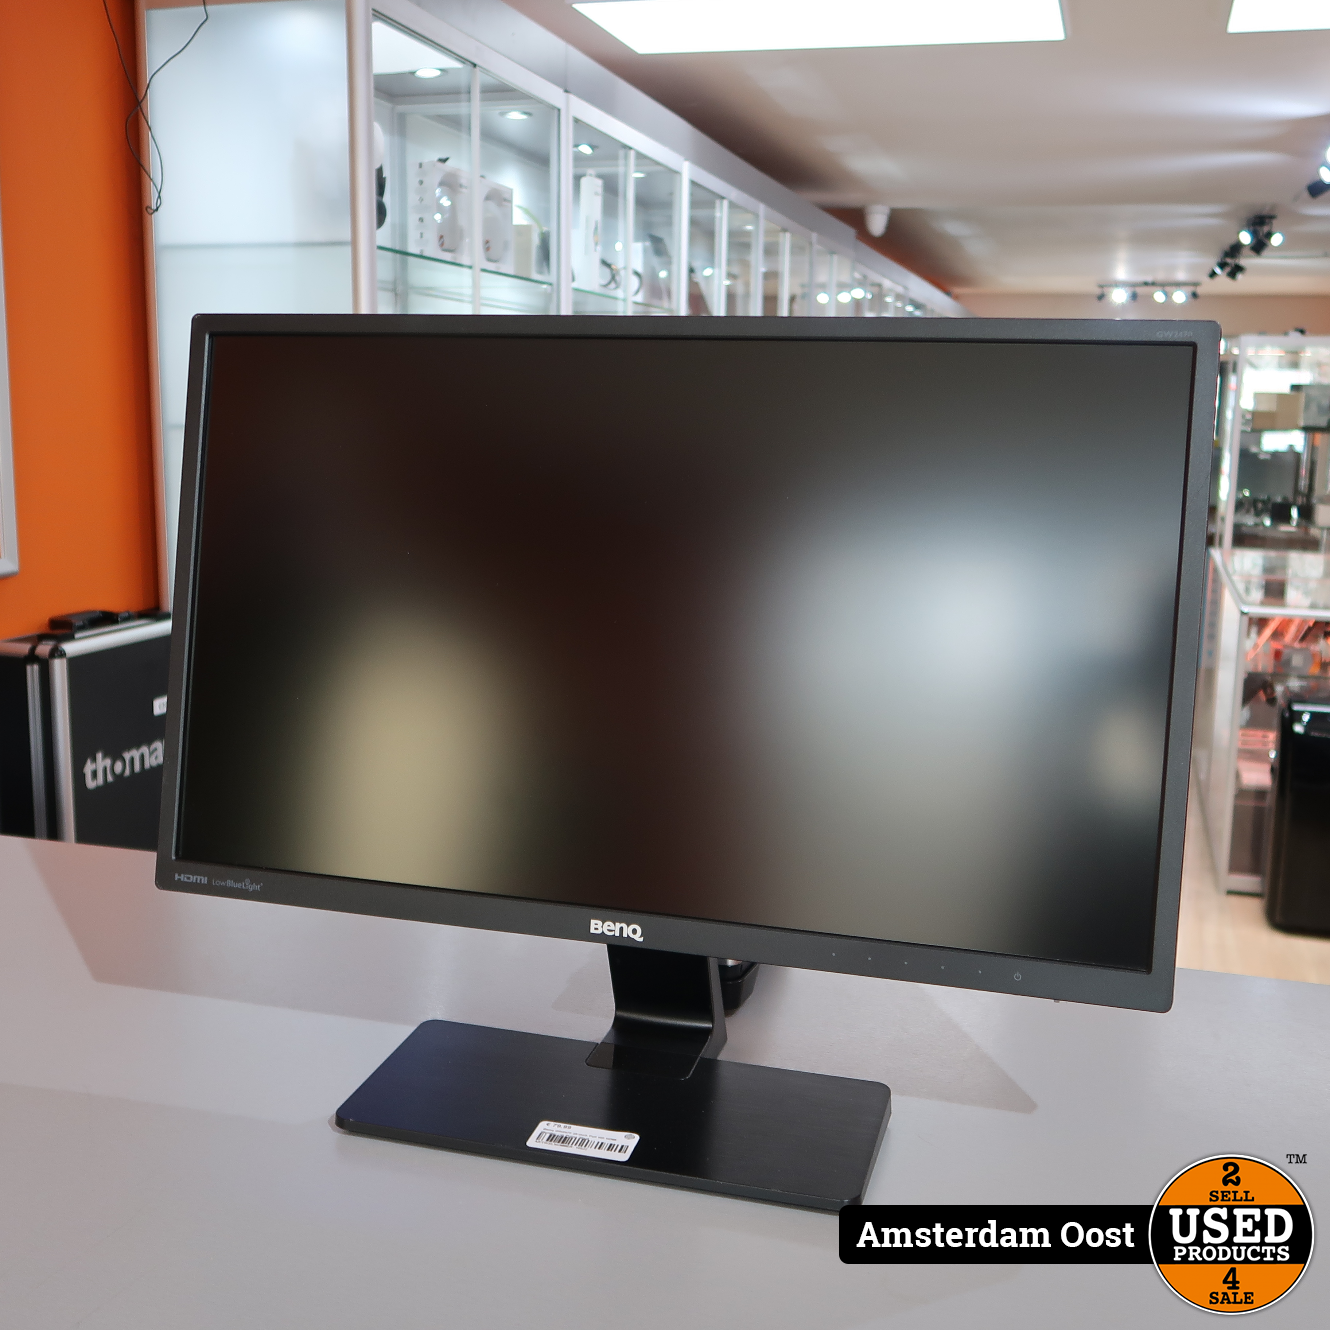 Machtig Begrafenis Ale Benq GW2470 24-inch Full HD HDMI Monitor | in Prima Staat - Used Products  Amsterdam Oost